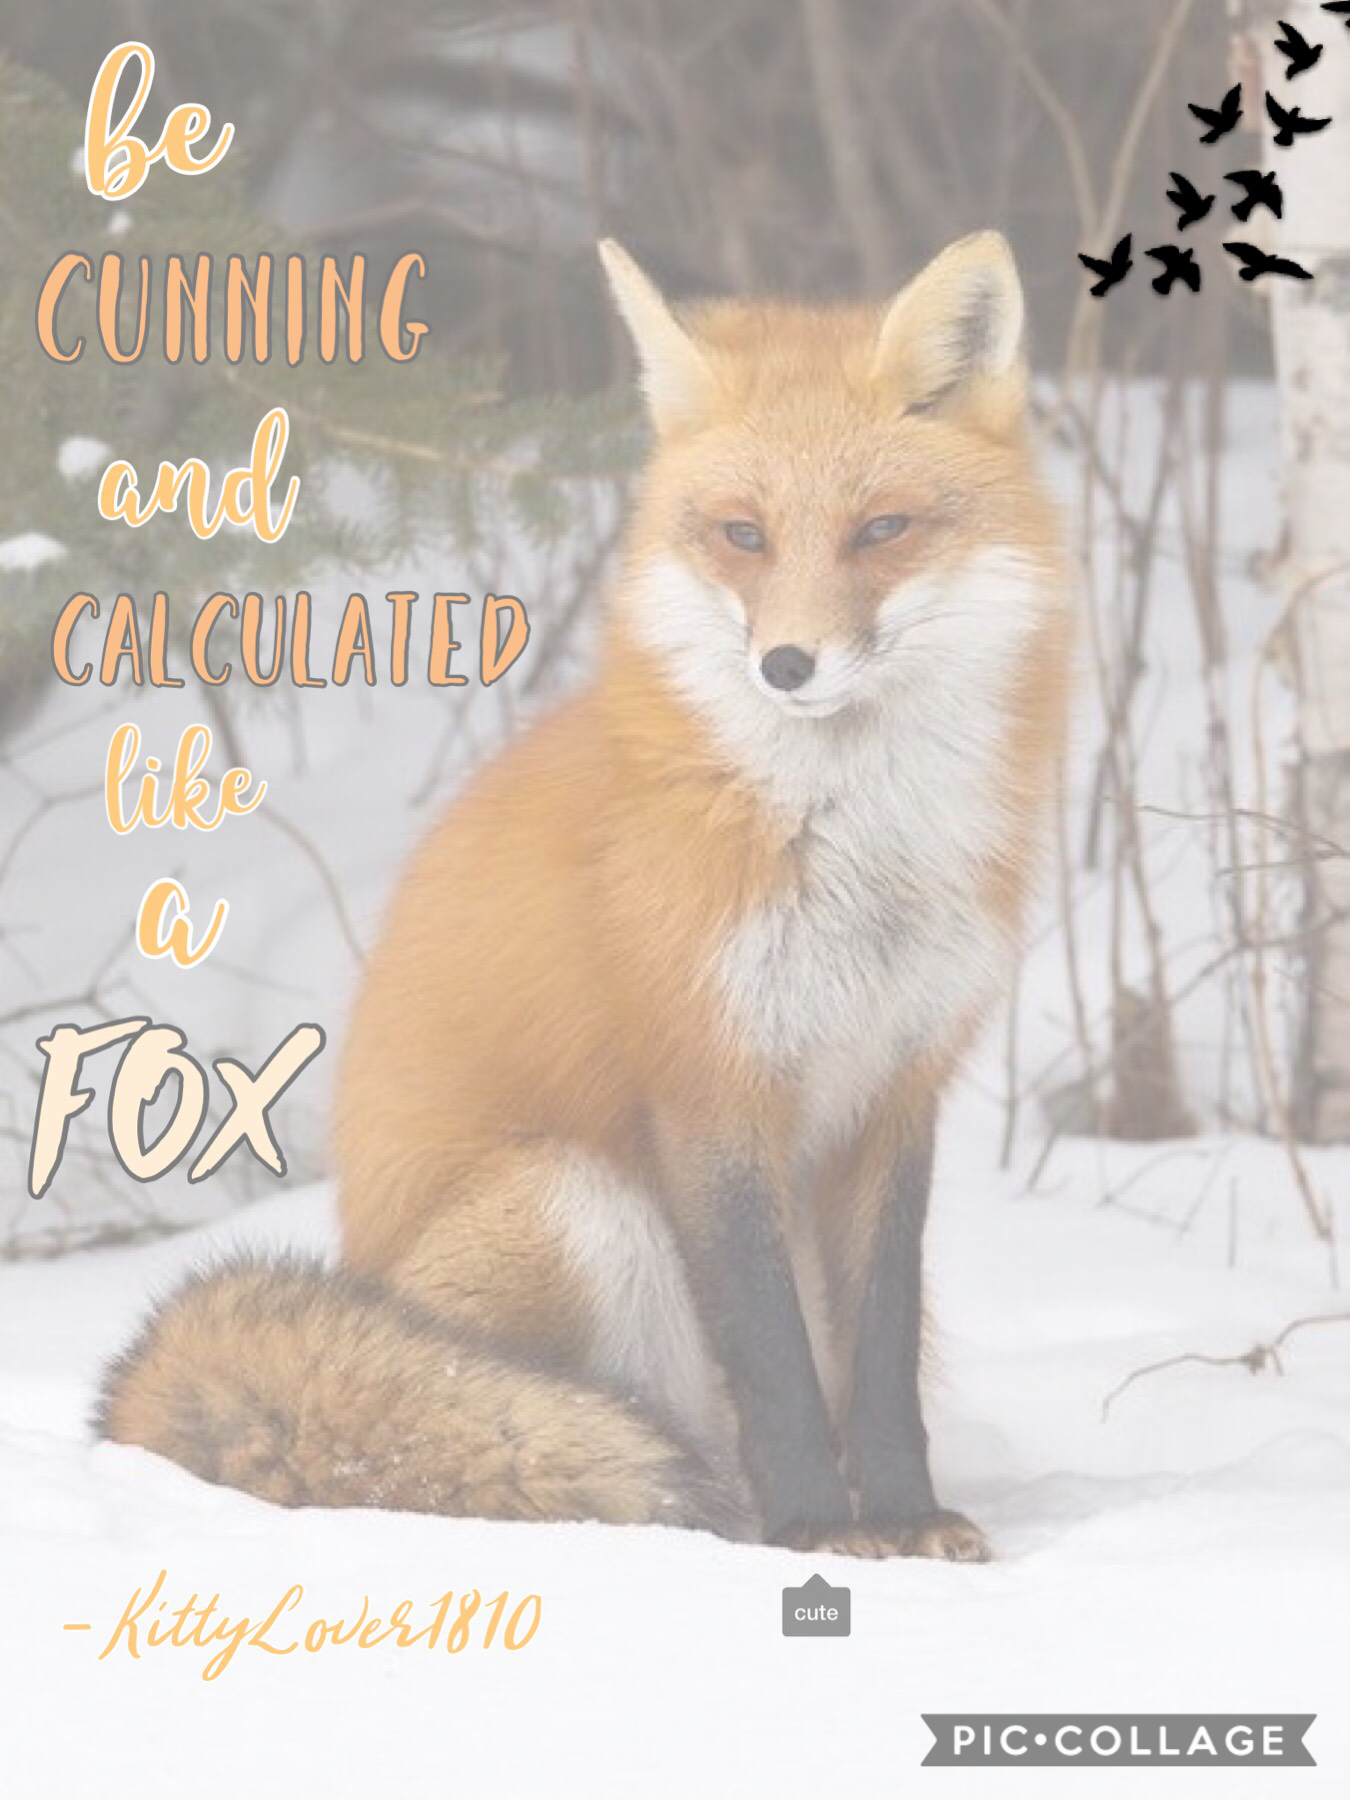 🧡🦊TAP🦊🧡
Hey guys! Sorry I've been away (I've been busy with school and stuff at home) but things will hopefully start to settle down so but for now here's a collage I've been meaning to post for a while...
So this is another quote I made up, I wanted to d